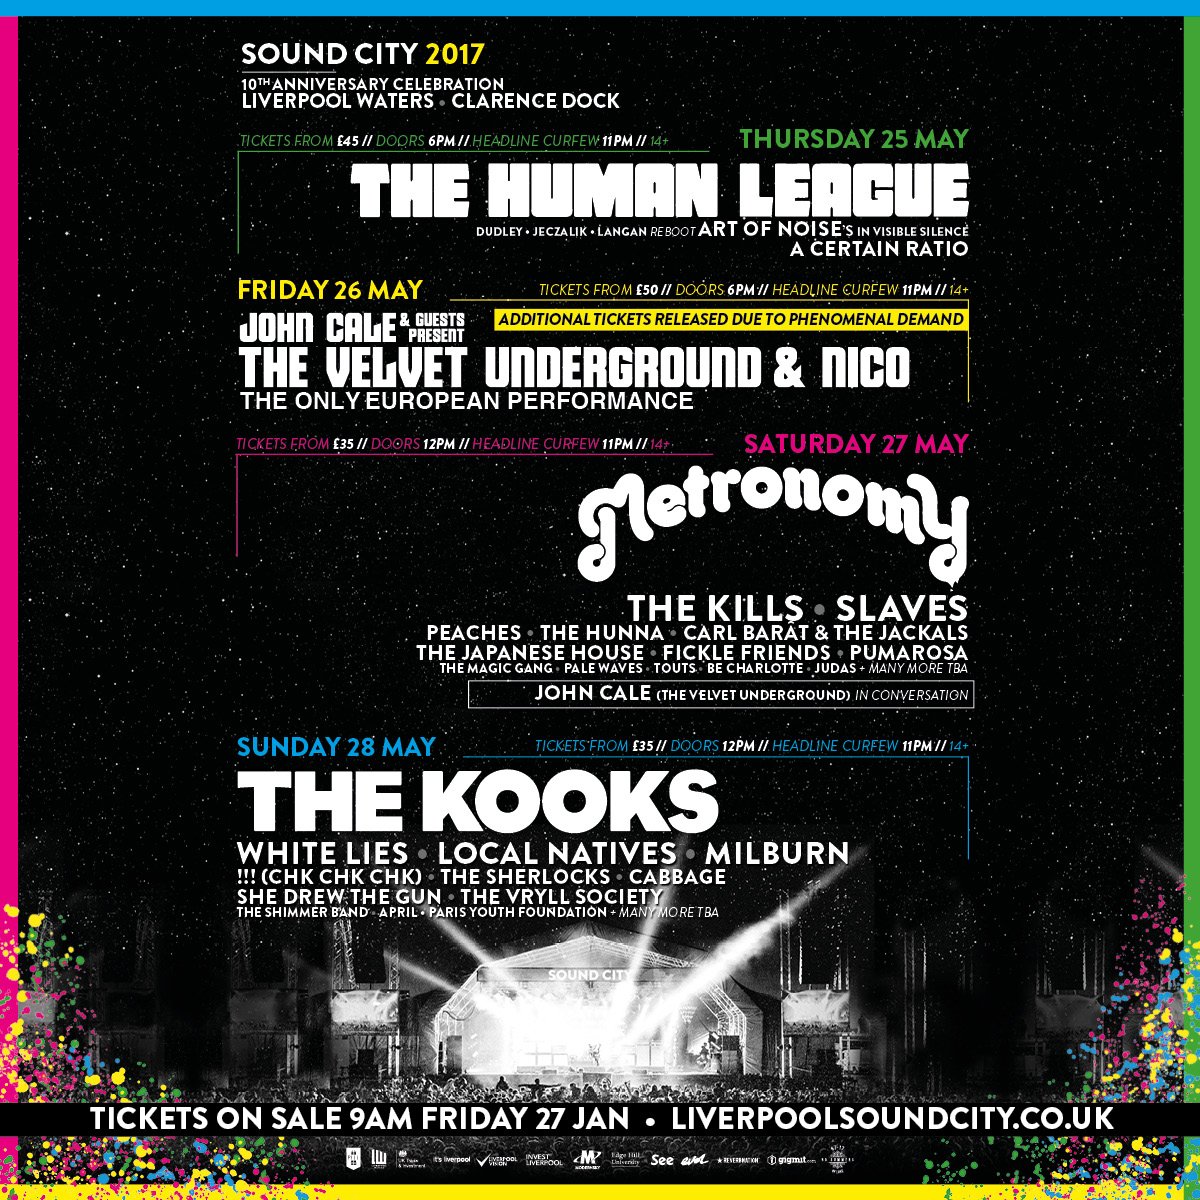 The Human League, John Cale, Metronomy and The Kooks announced for Liverpool Sound City 2017